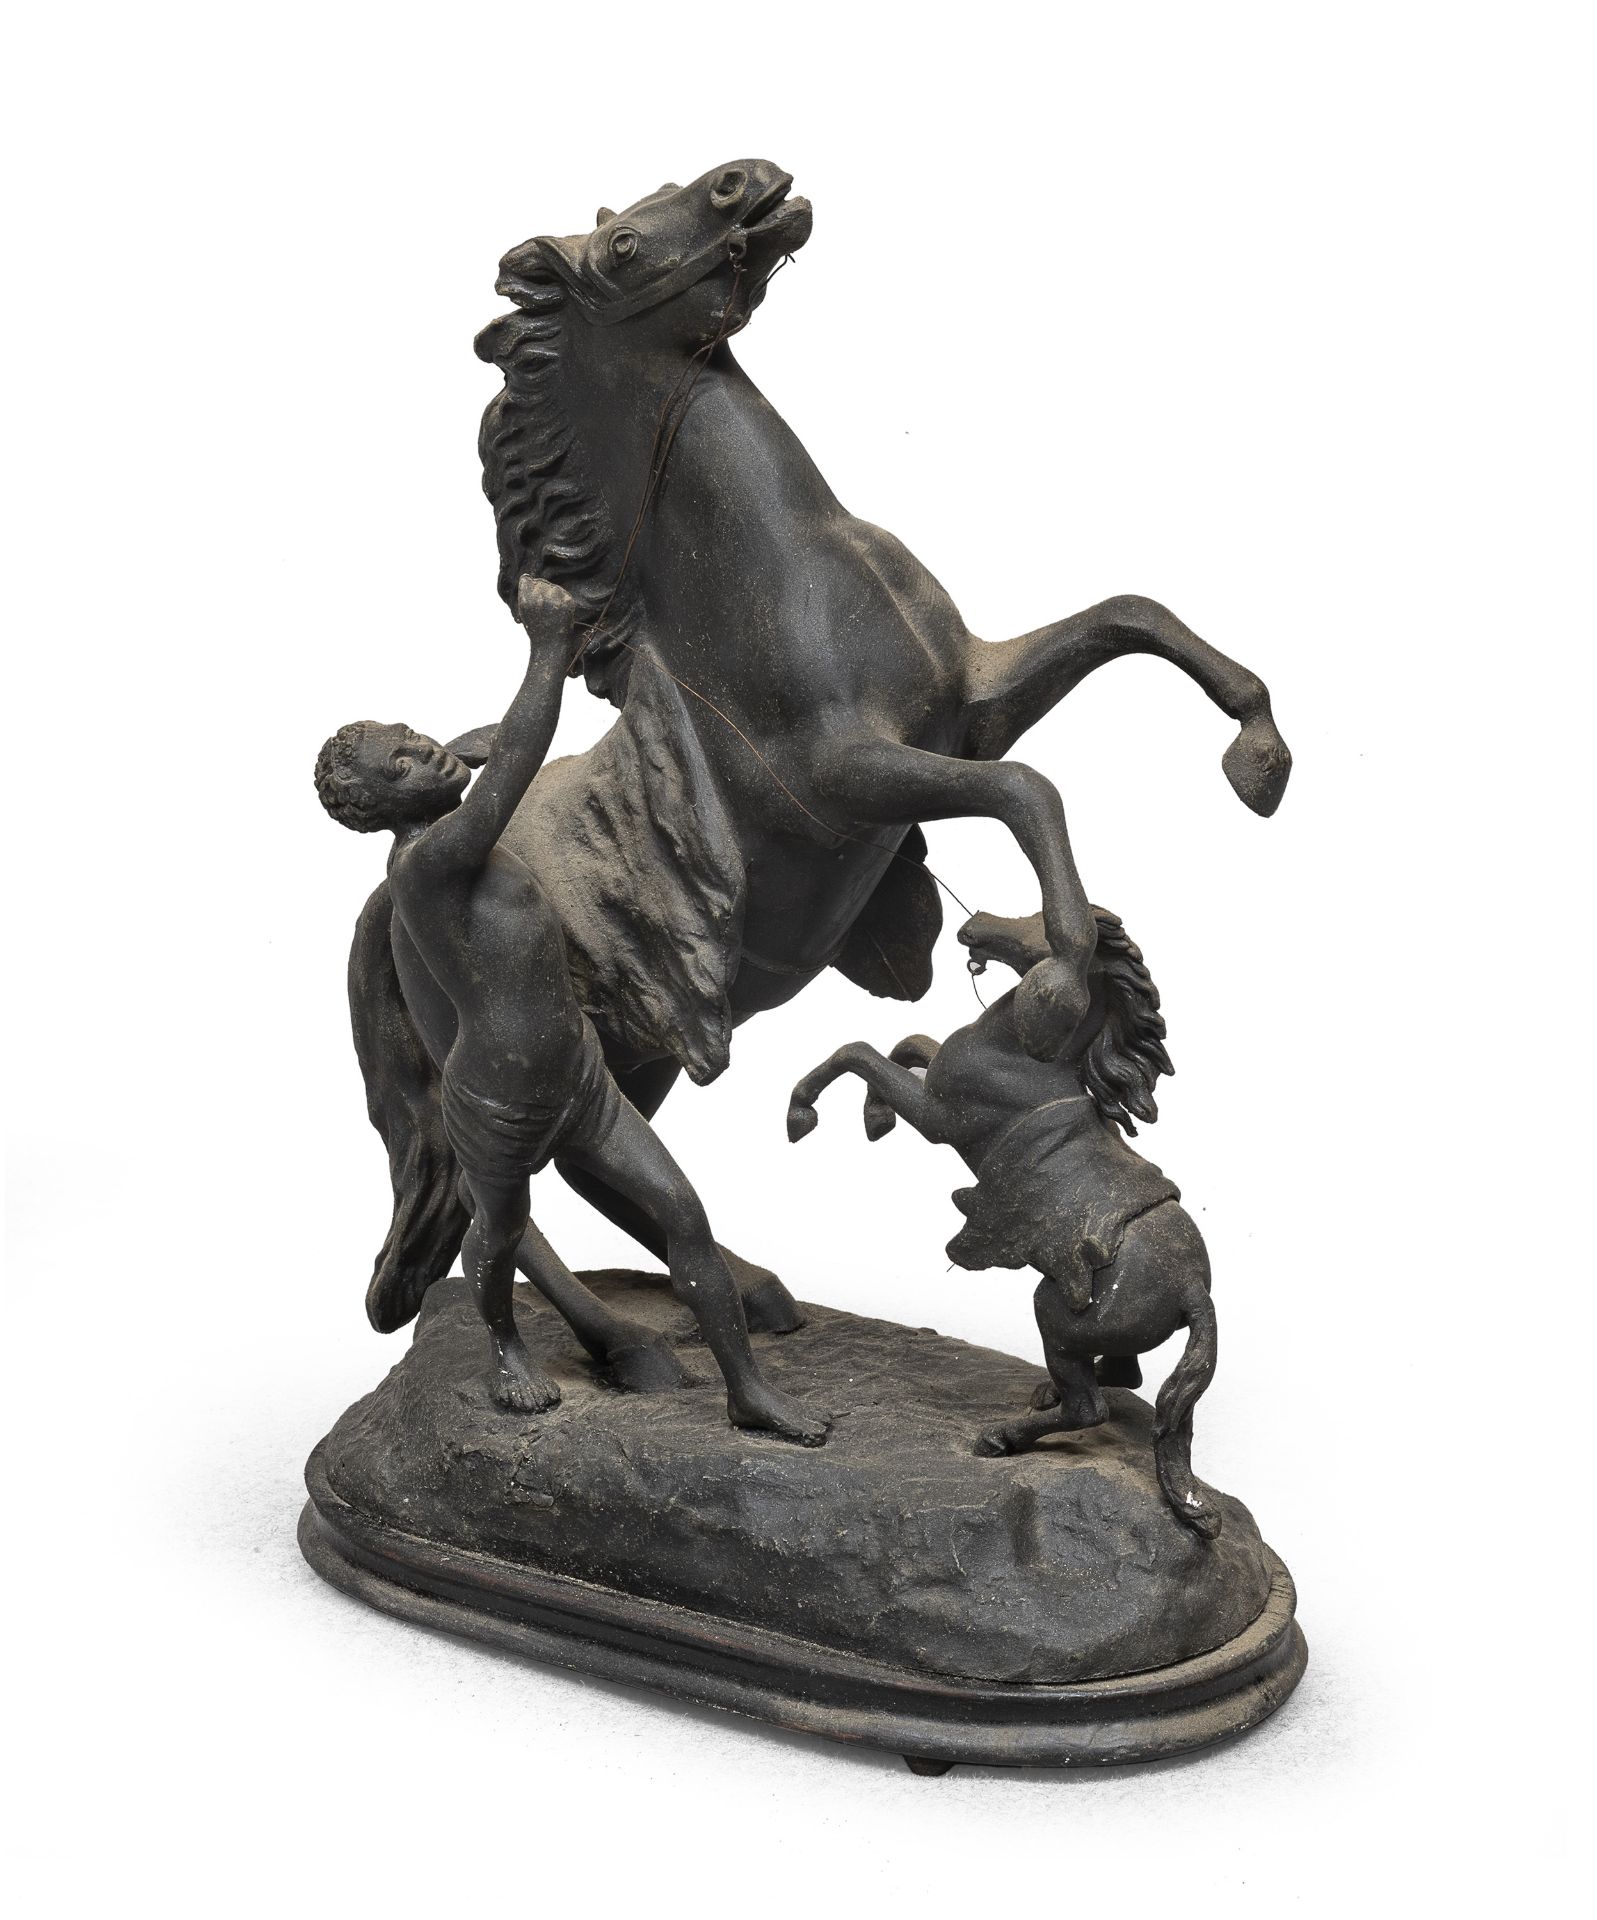 BURNISHED METAL SCULPTURE END OF THE 19TH CENTURY